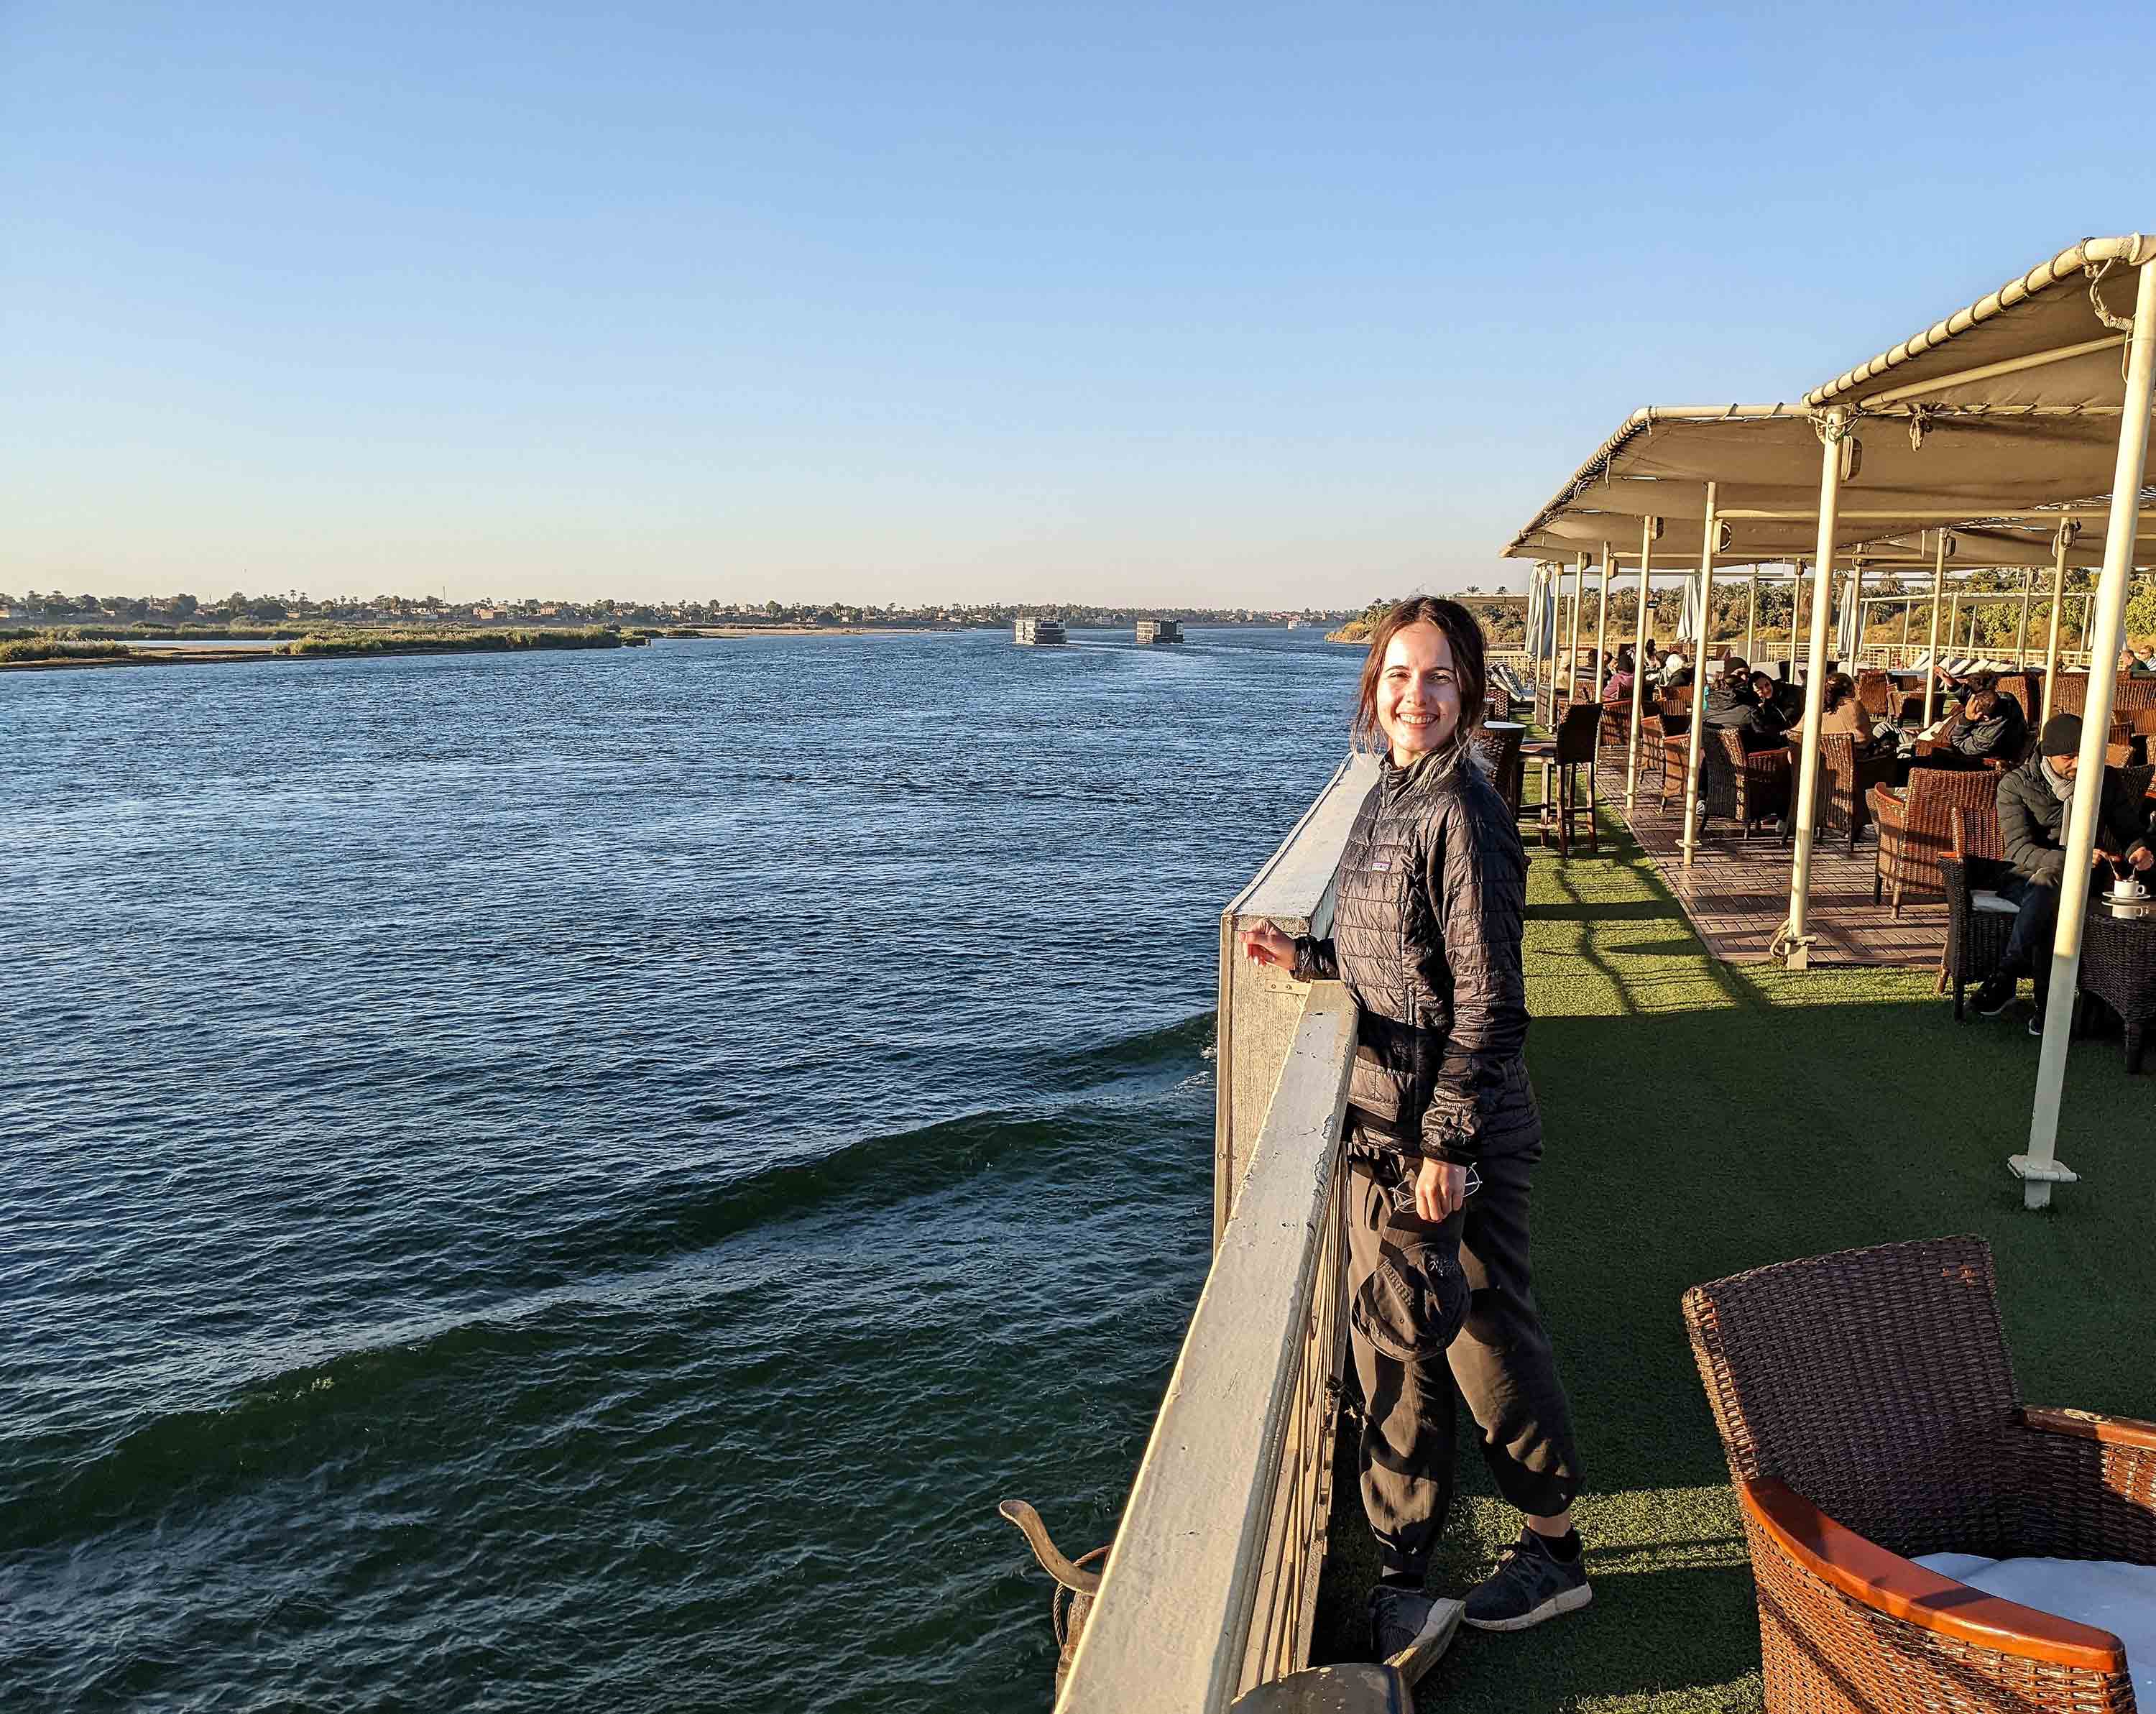 Taking in the scenery from the top deck of a Nile cruise ship